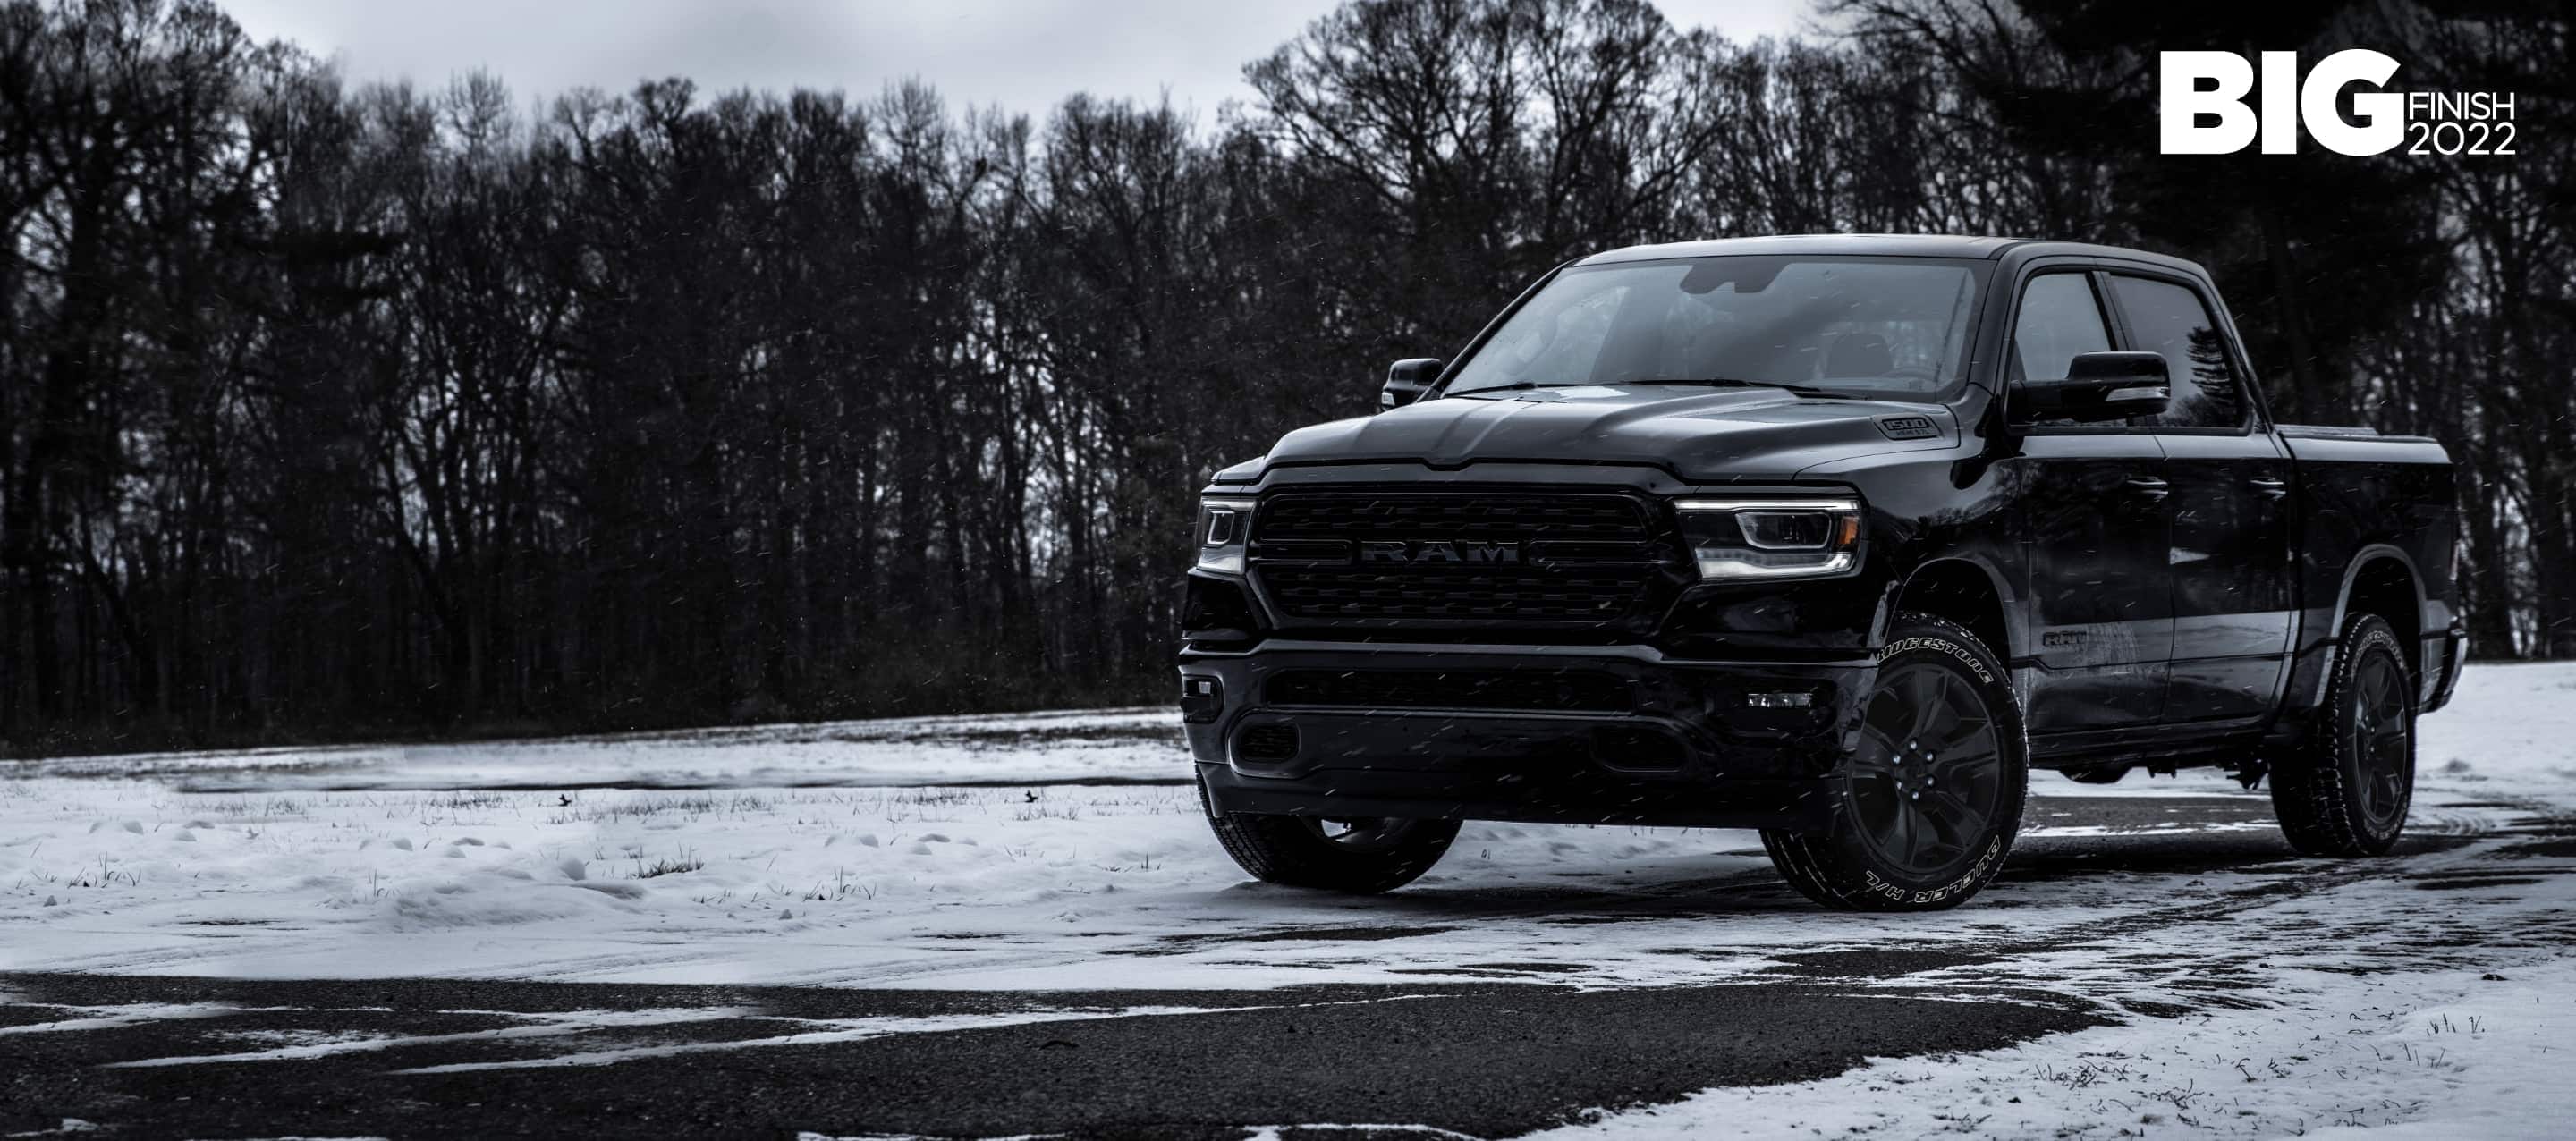 A black 2022 Ram 1500 Big Horn Crew Cab 4x4 parked on a snow-covered clearing in the woods. The Big Finish 2022.